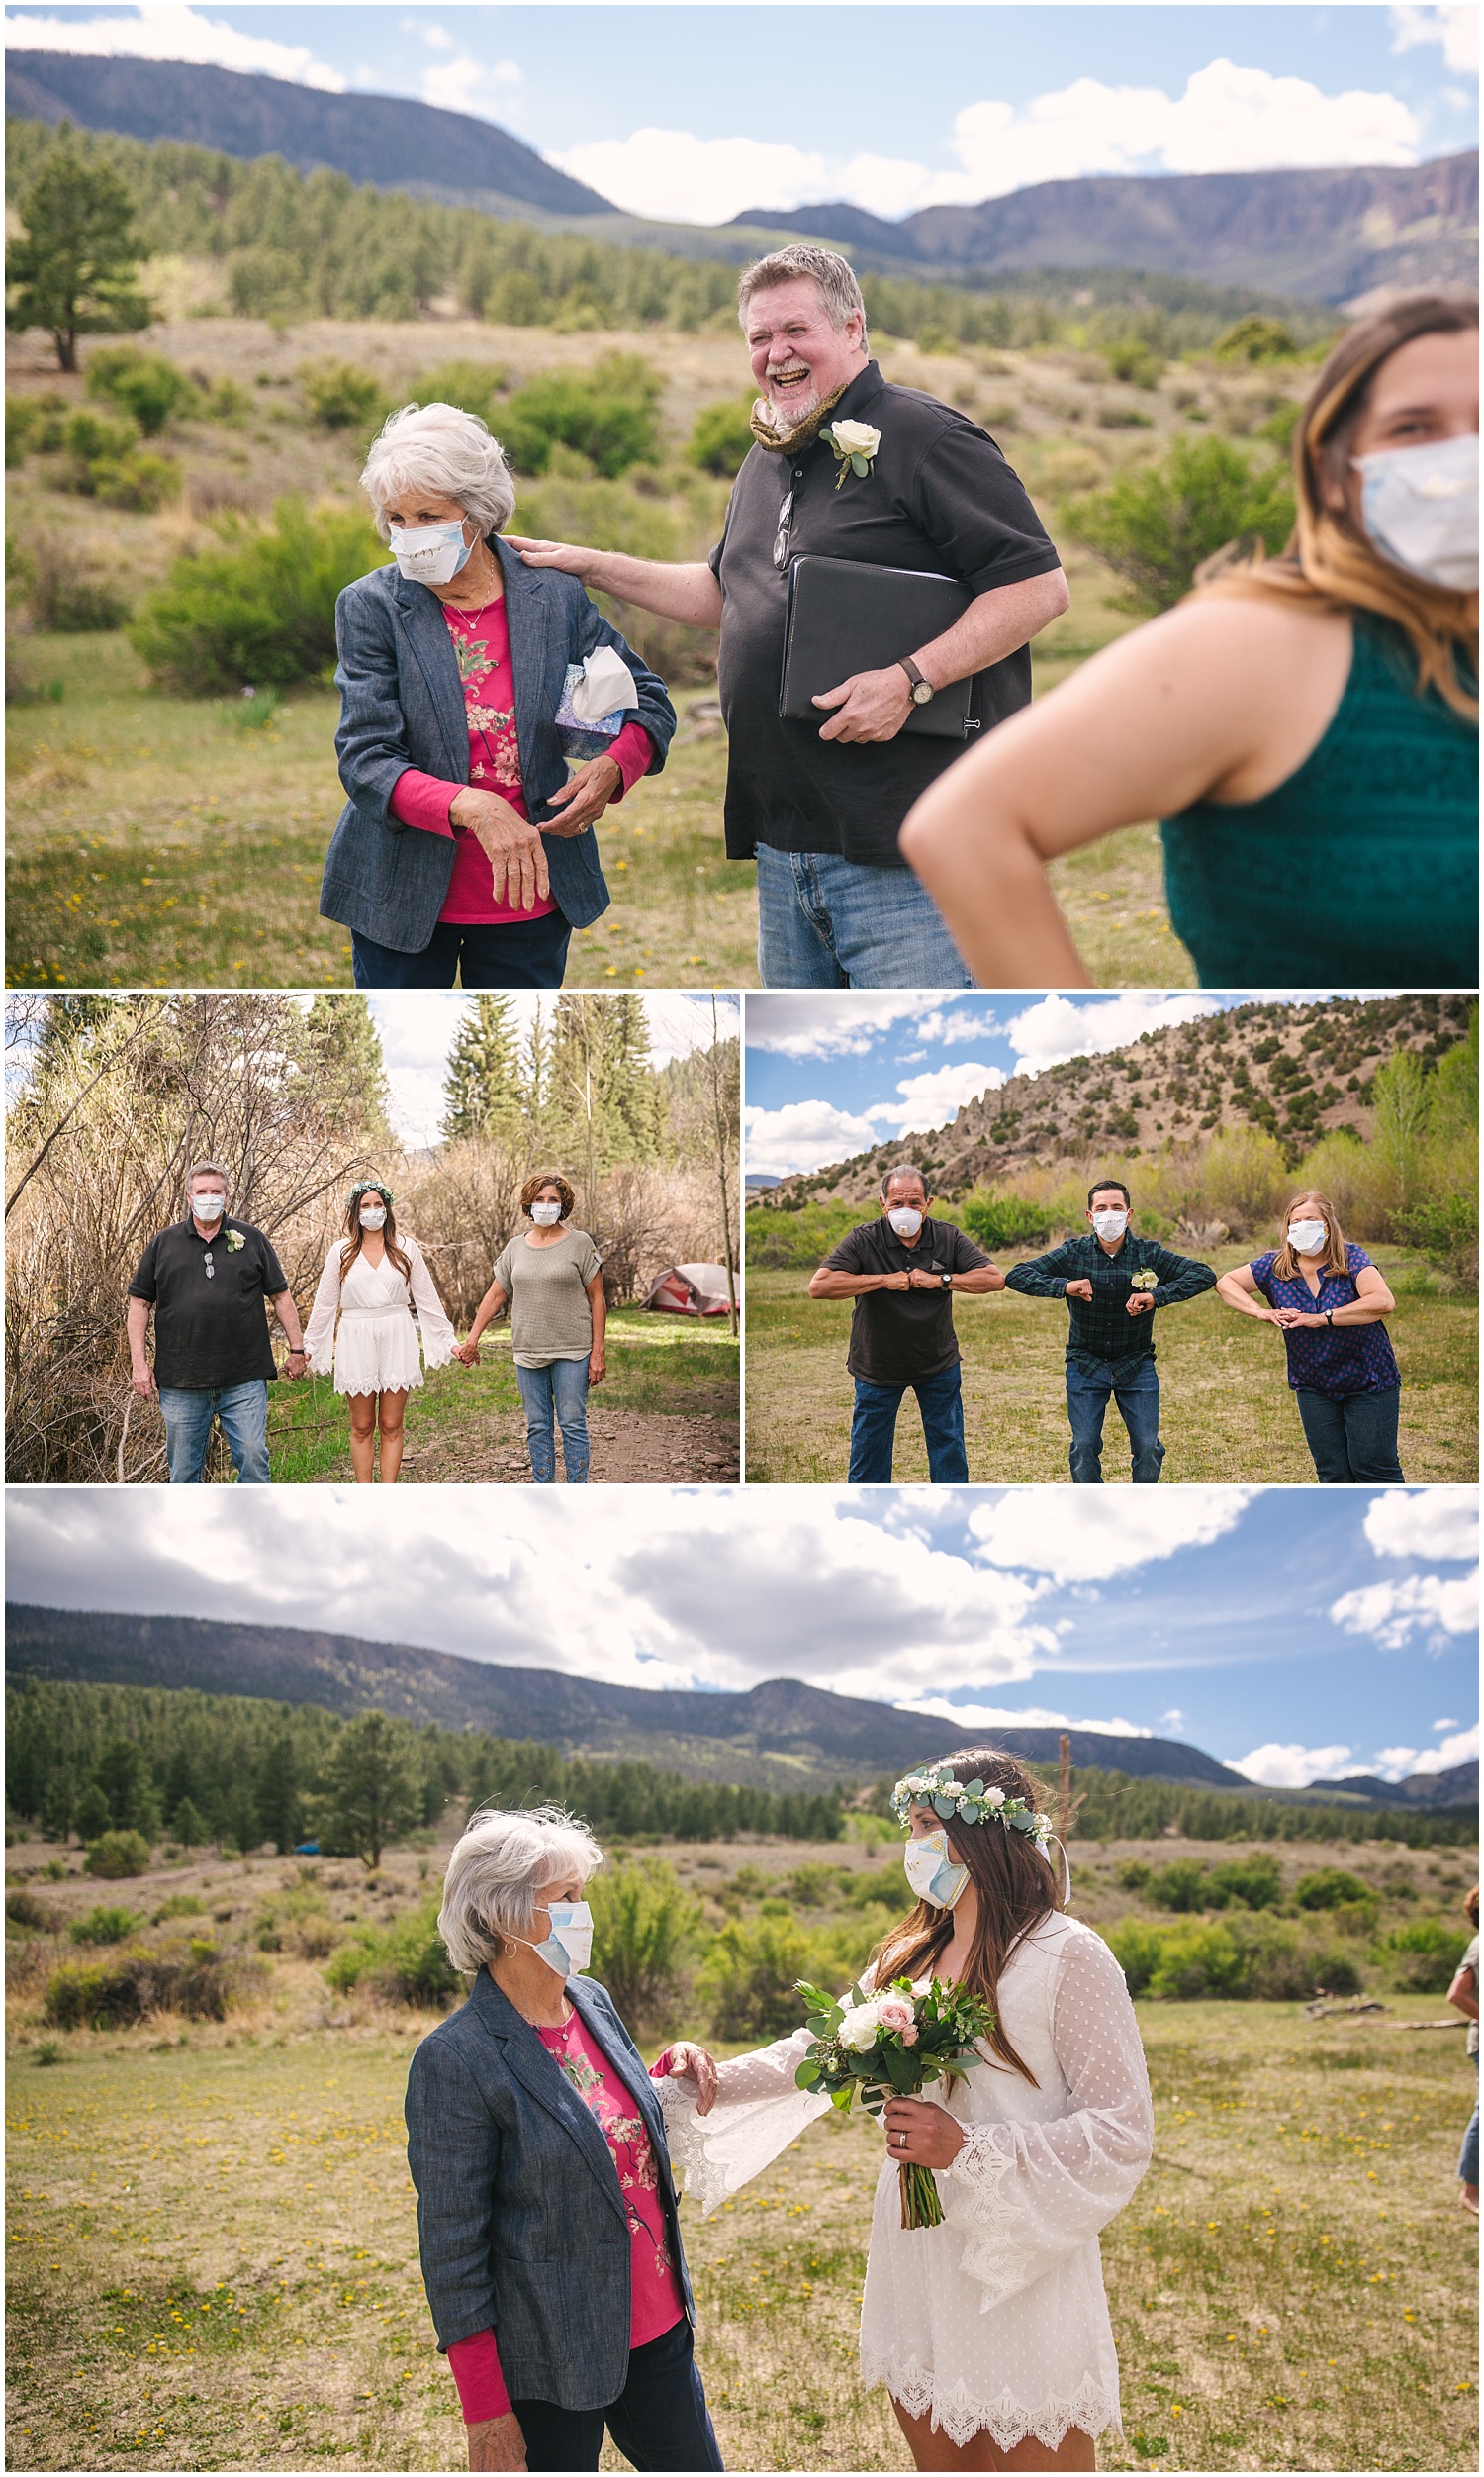 Family photos in face masks at backcountry campsite elopement during COVID-19 crisis